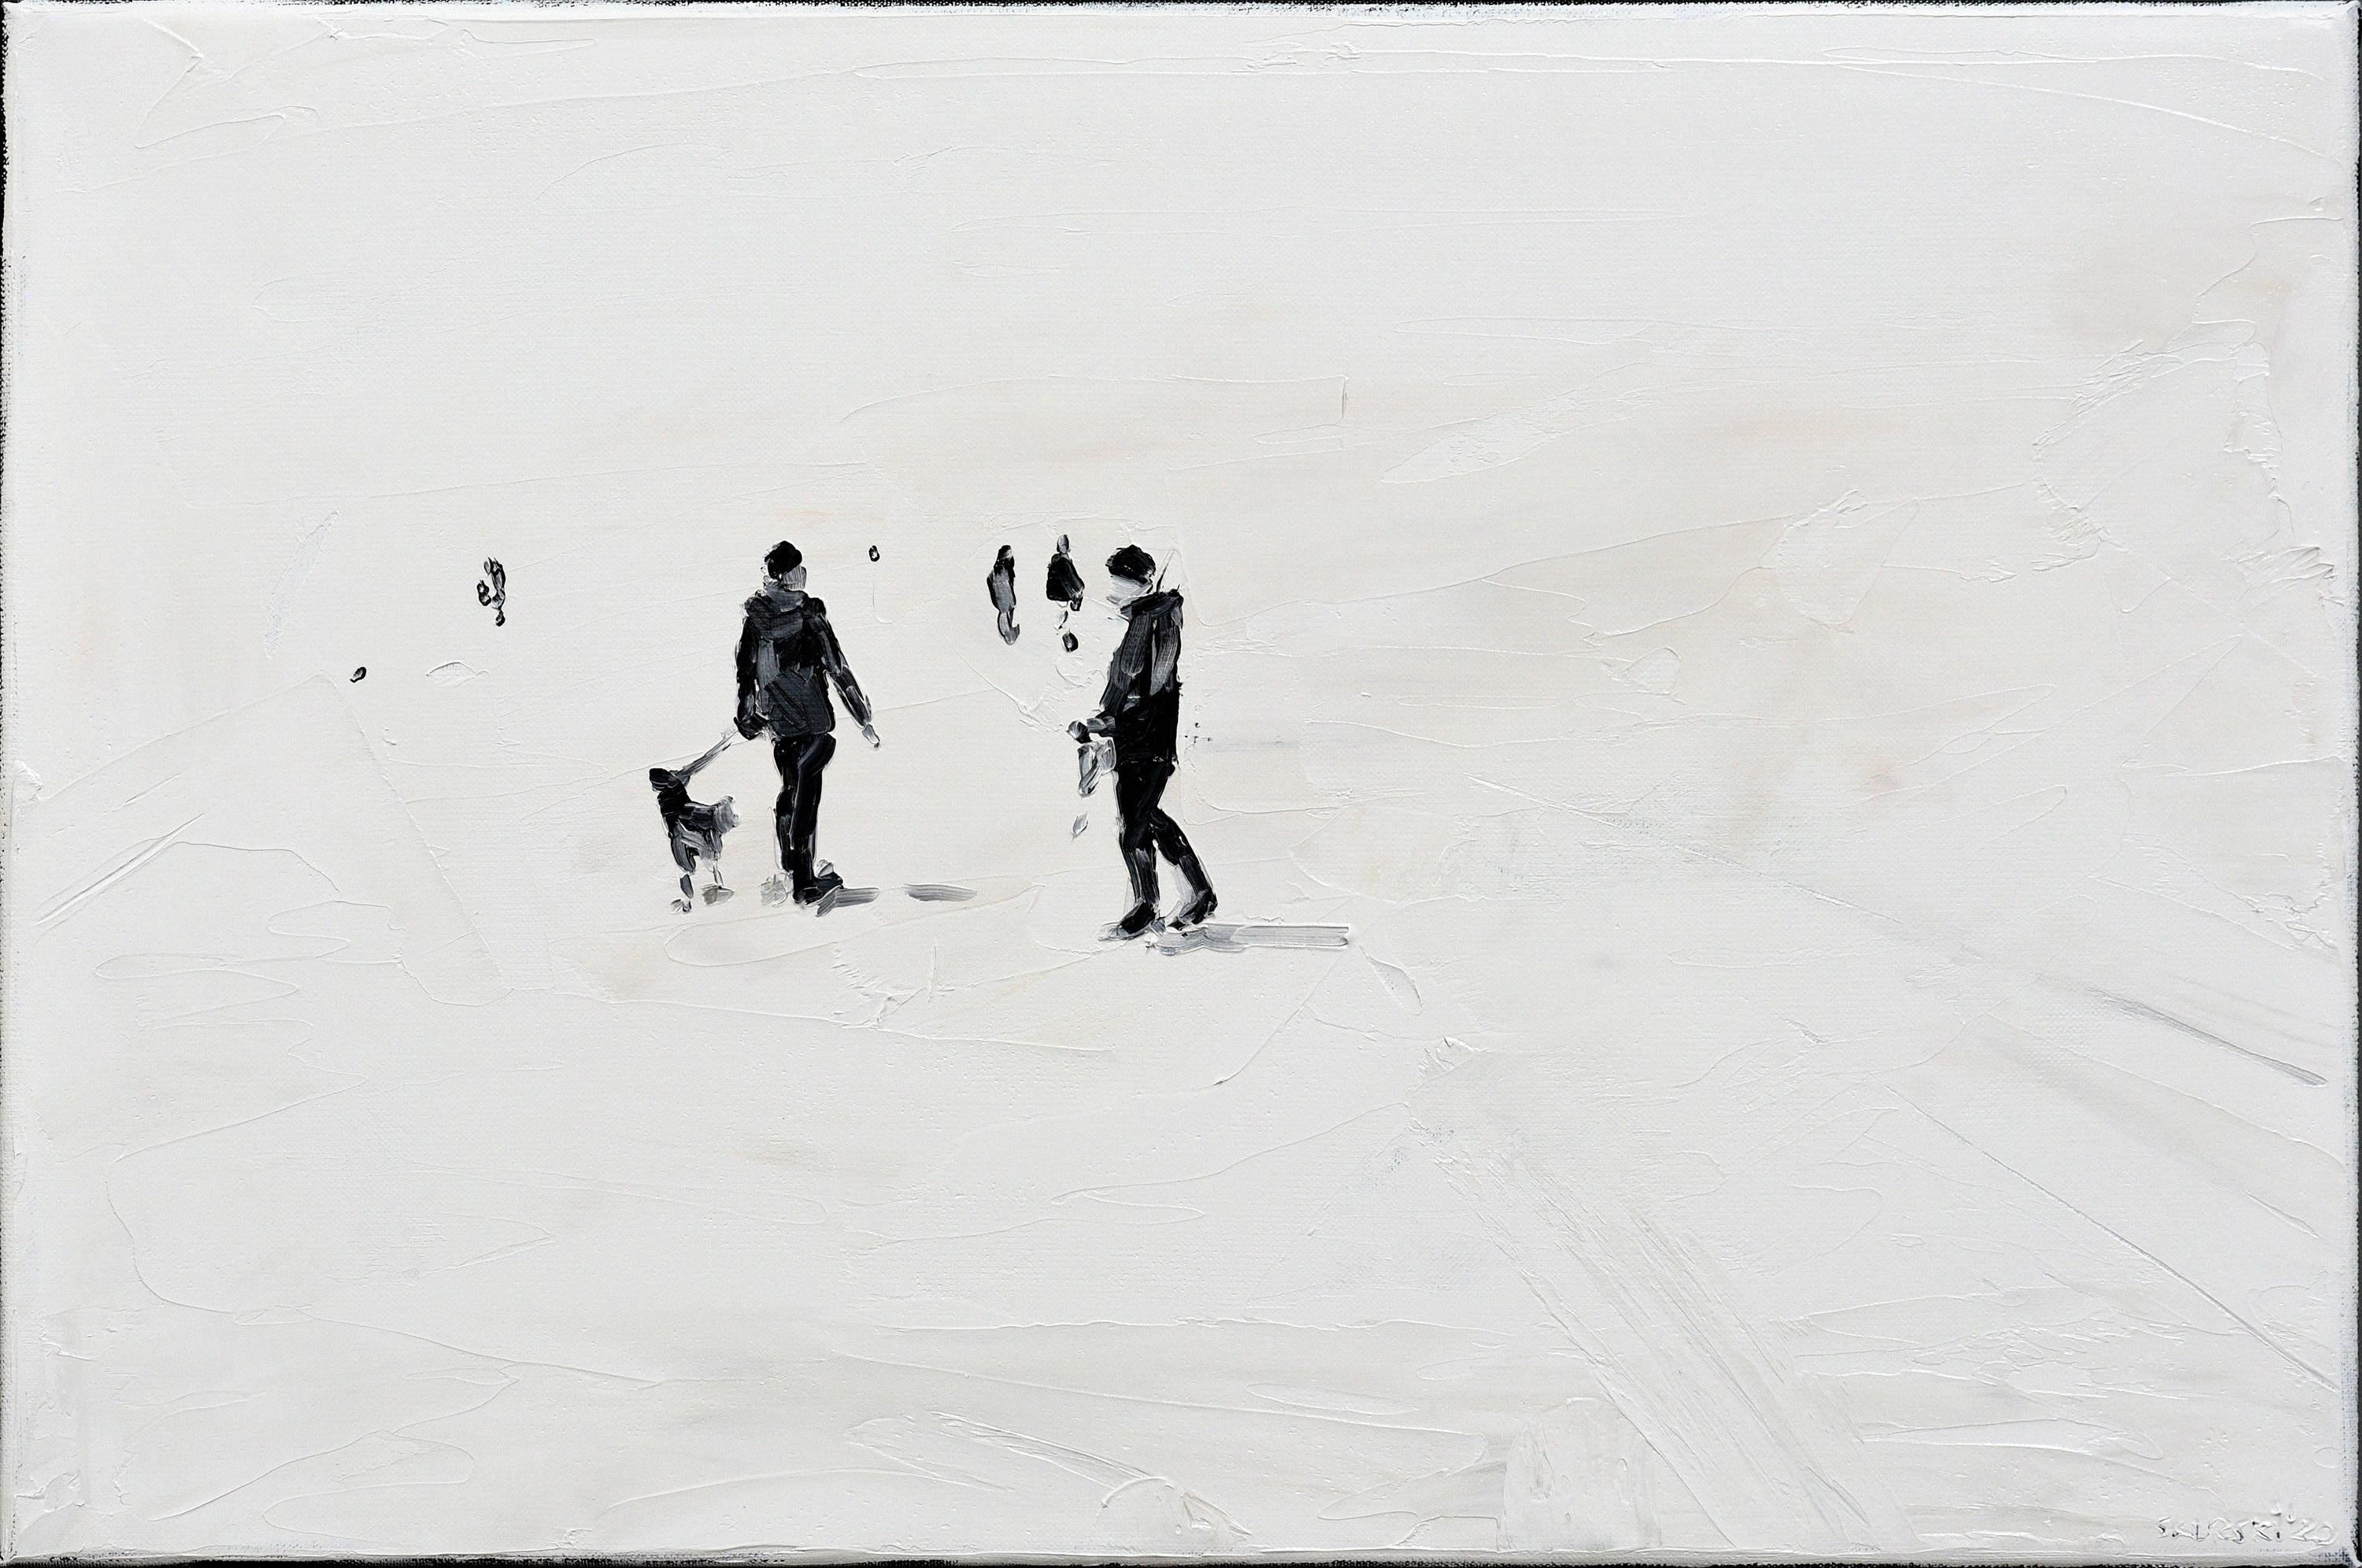 Hundestrand
40 x 60 cm
oil on canvas 
2020

A wide, apparently endless plain forms the background of the events: out of nowhere, dark figures enter the scenery, as if coming from the depths of the canvas, appearing through layers of bright, shiny